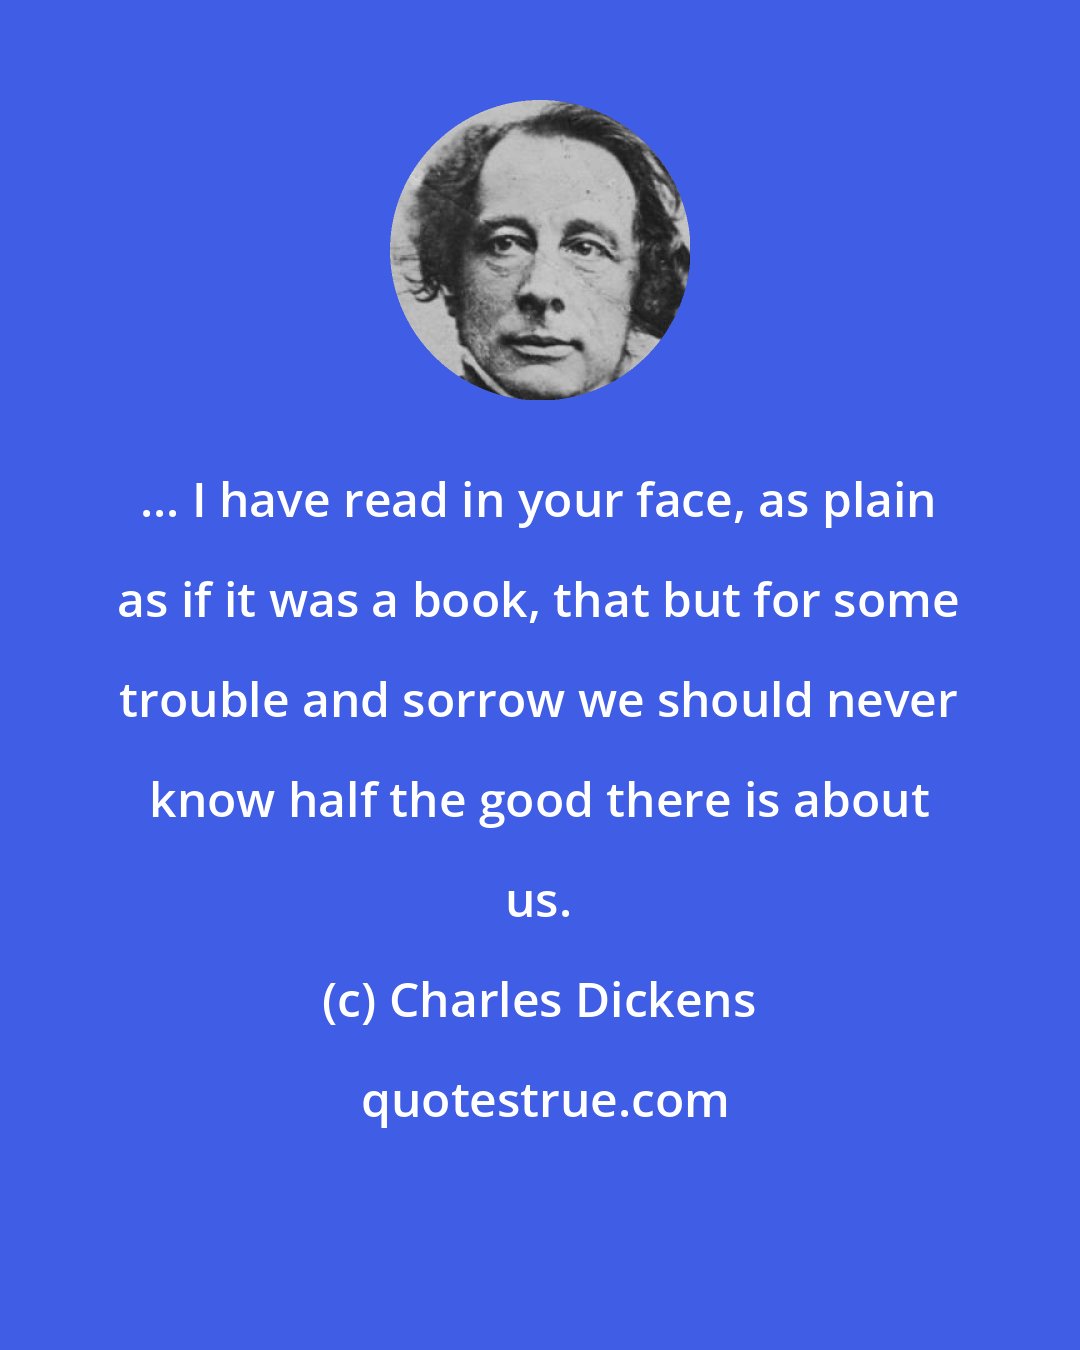 Charles Dickens: ... I have read in your face, as plain as if it was a book, that but for some trouble and sorrow we should never know half the good there is about us.